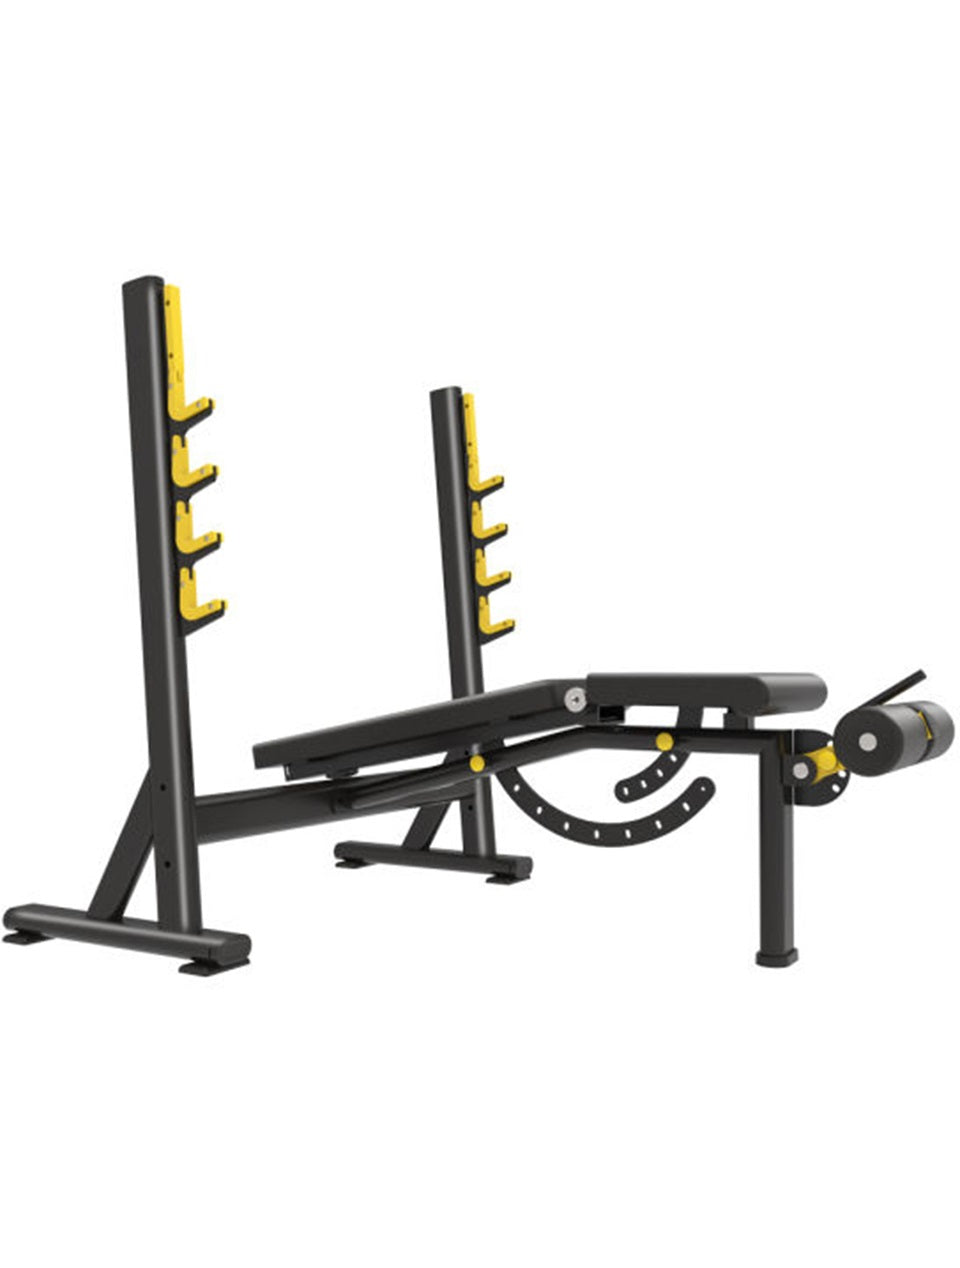 1441 Fitness Olympic Adjustable Bench with Barbell Support Black - 41FF46B